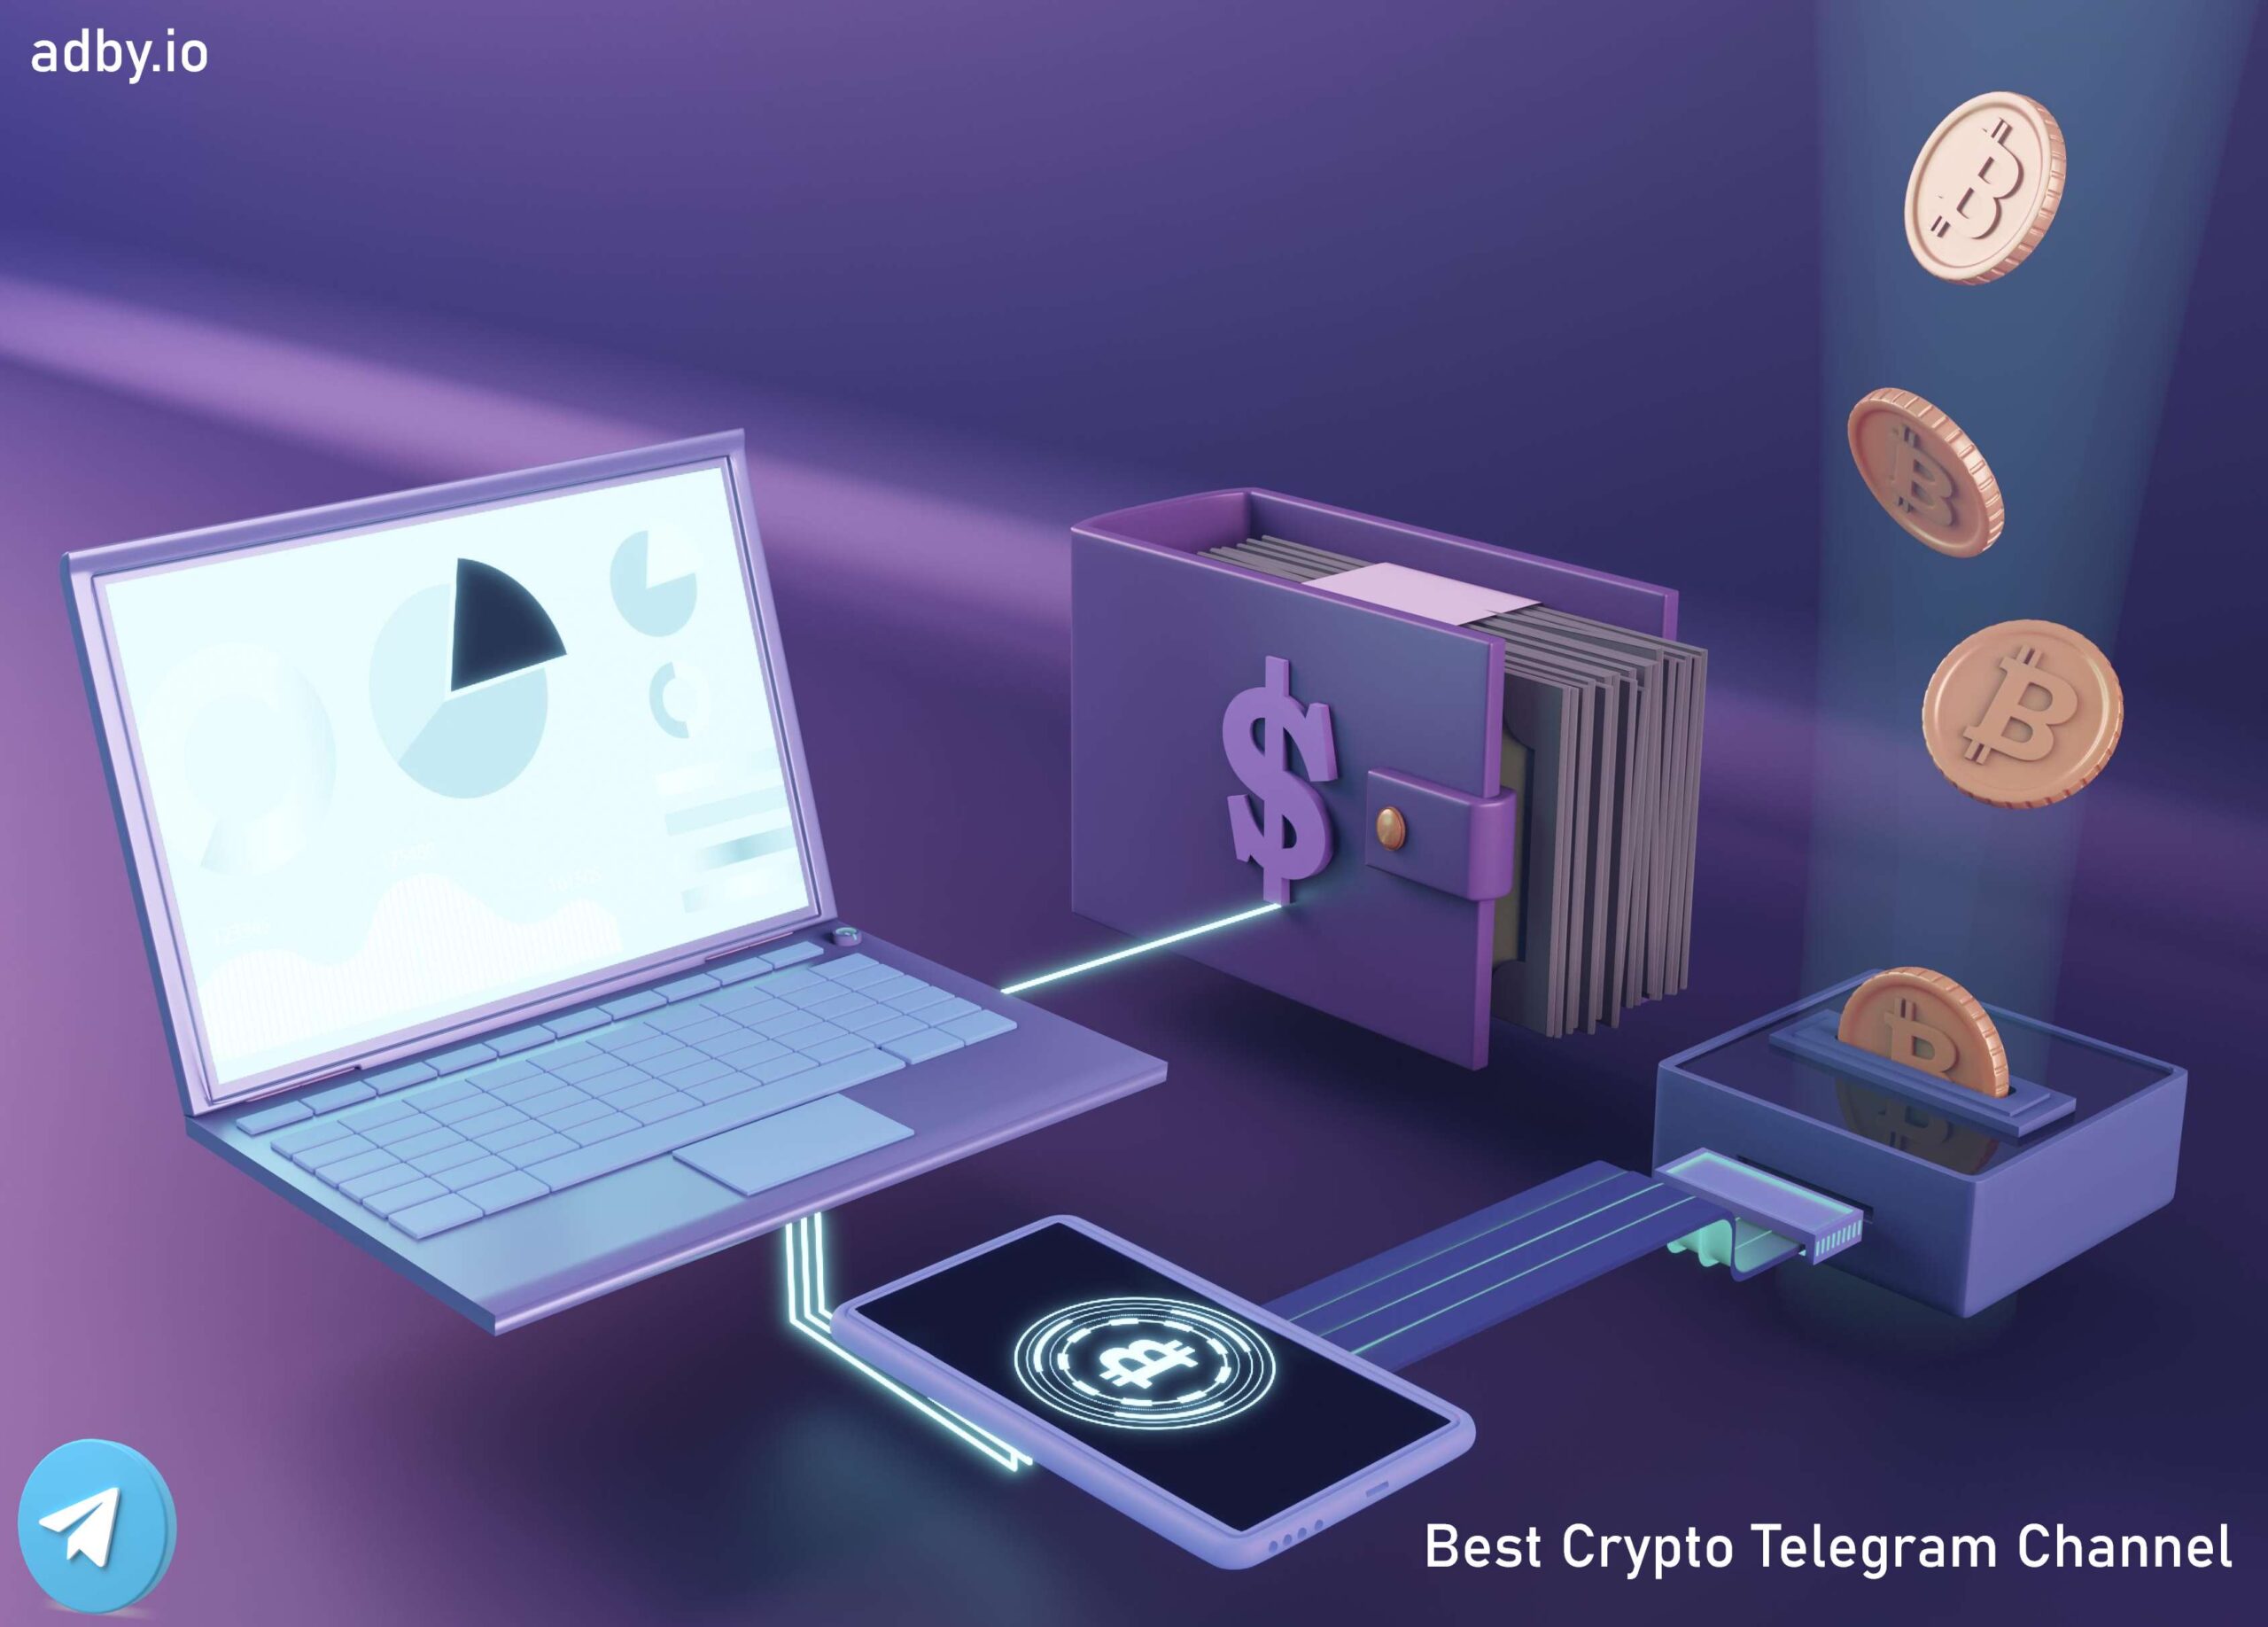 The Top 10 Crypto Telegram Channels in 2022